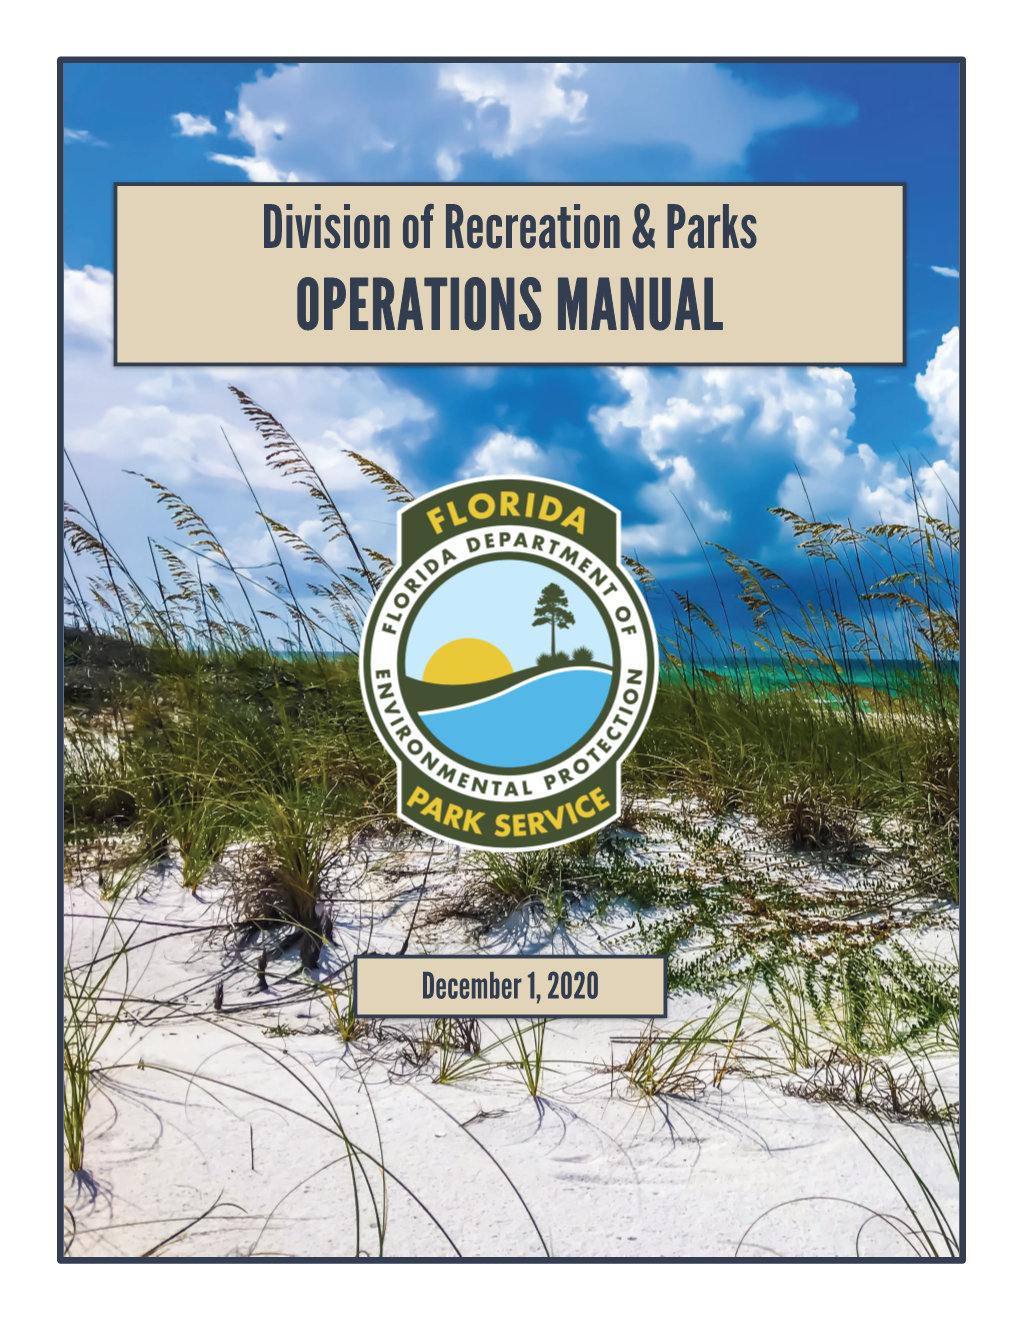 Division of Recreation & Parks